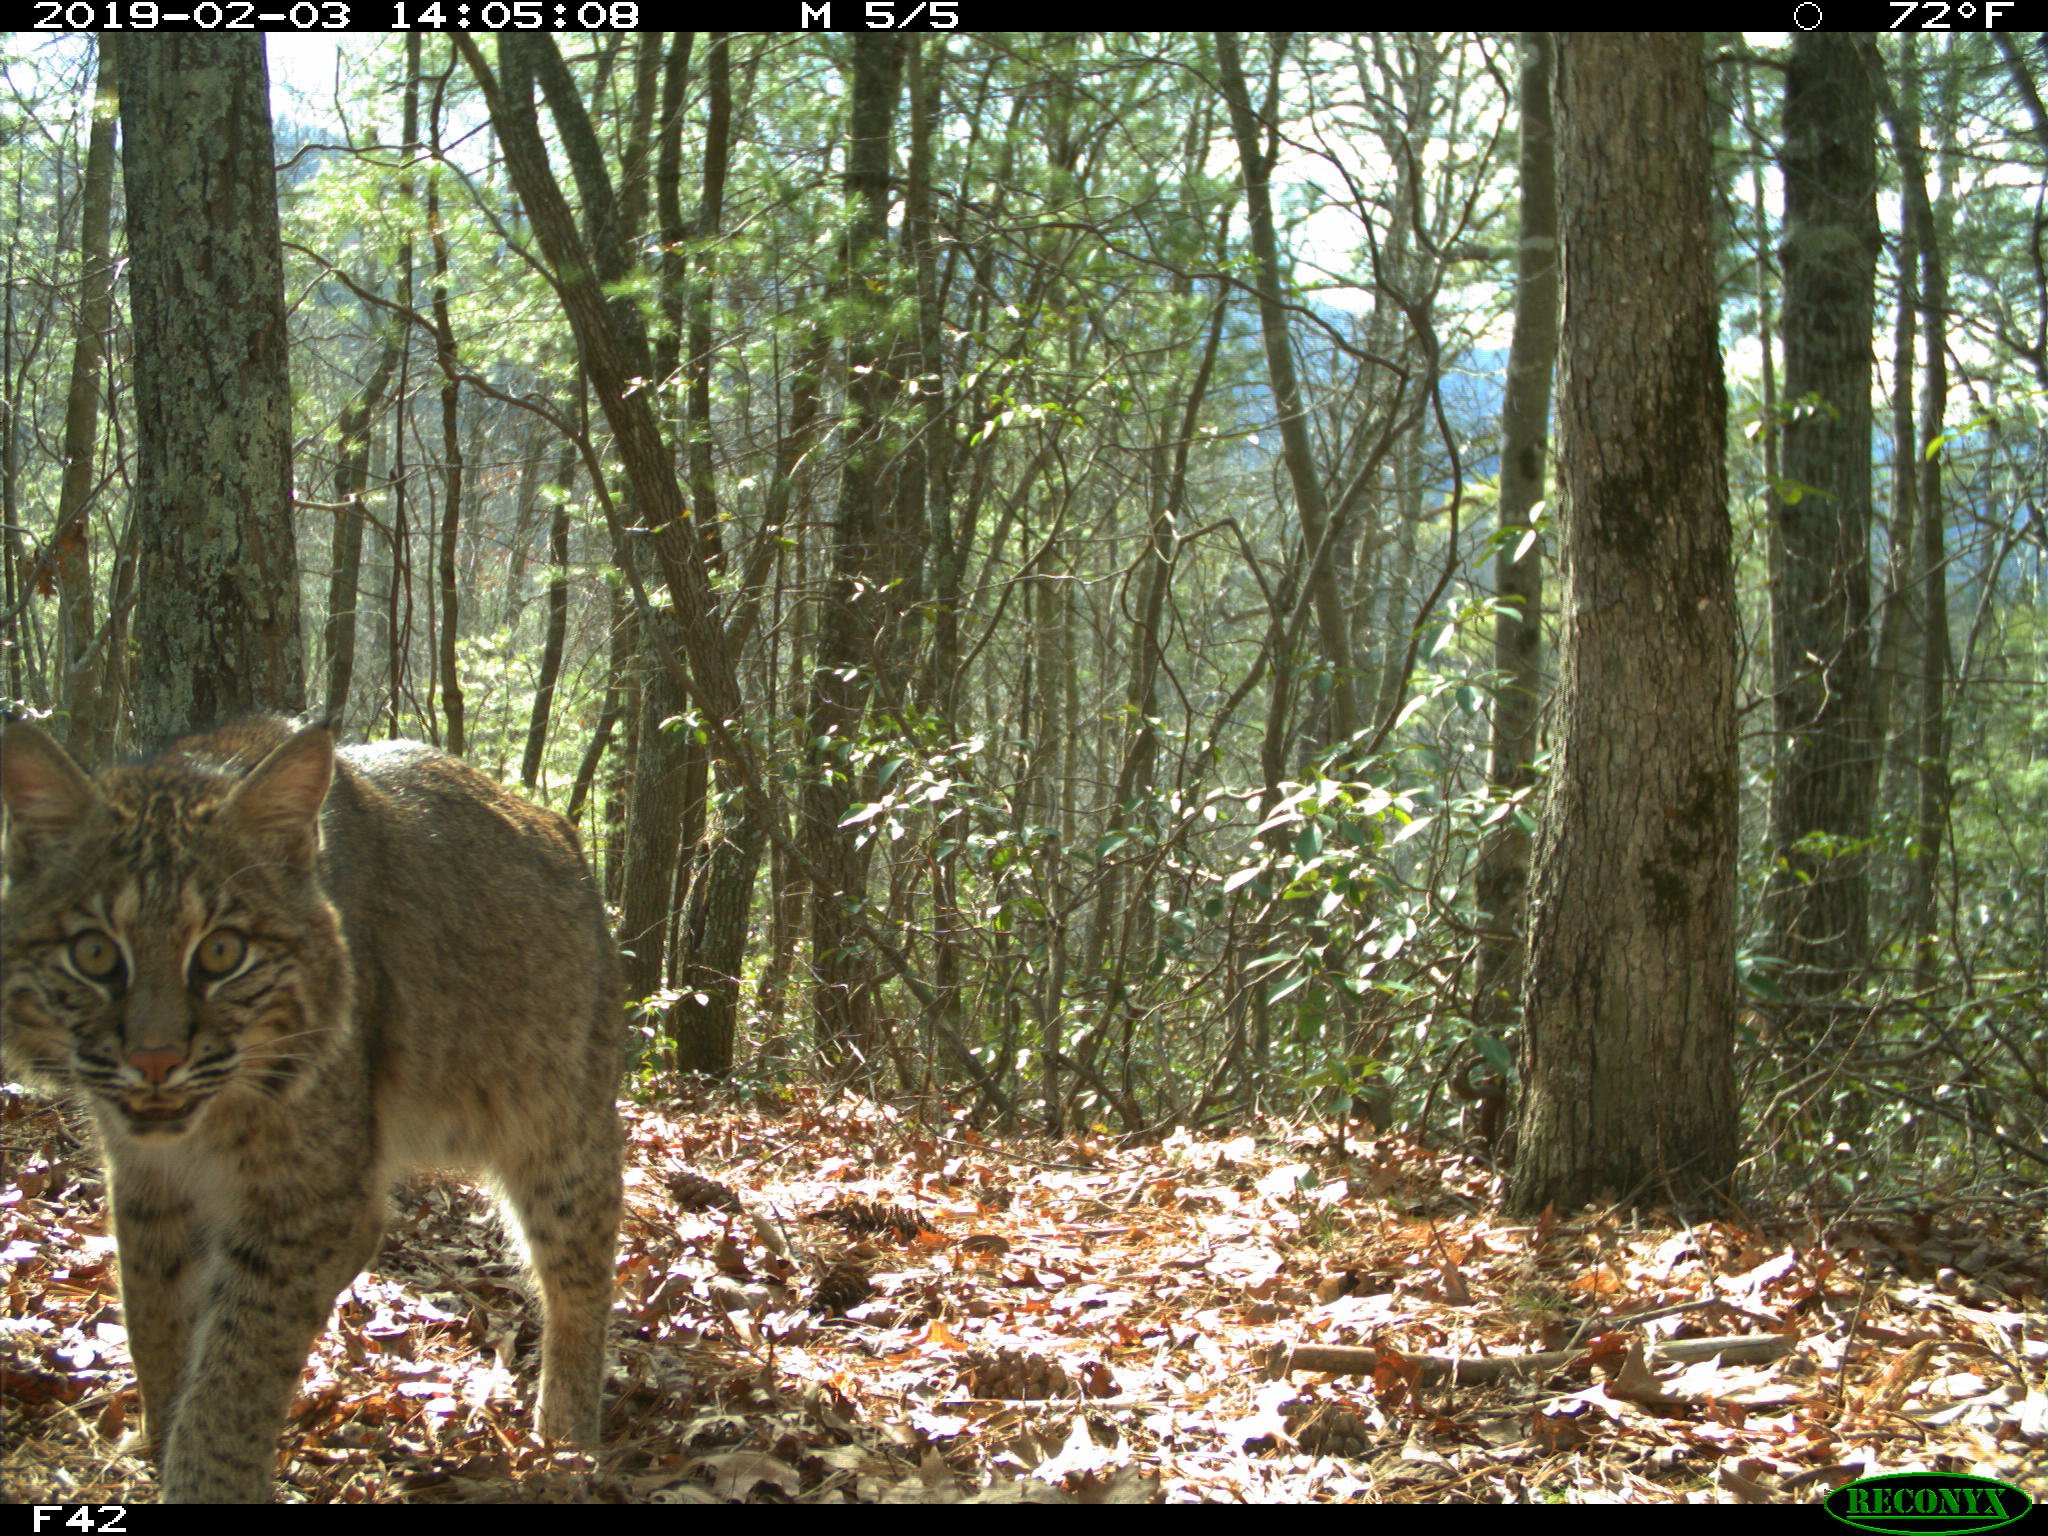  Bobcats are among the diverse array of wildlife that inhabits the Pigeon River Gorge beyond the report’s three target species: black bears, elk and white-tailed deer.  Photo: Wildlands Network/NPCA 